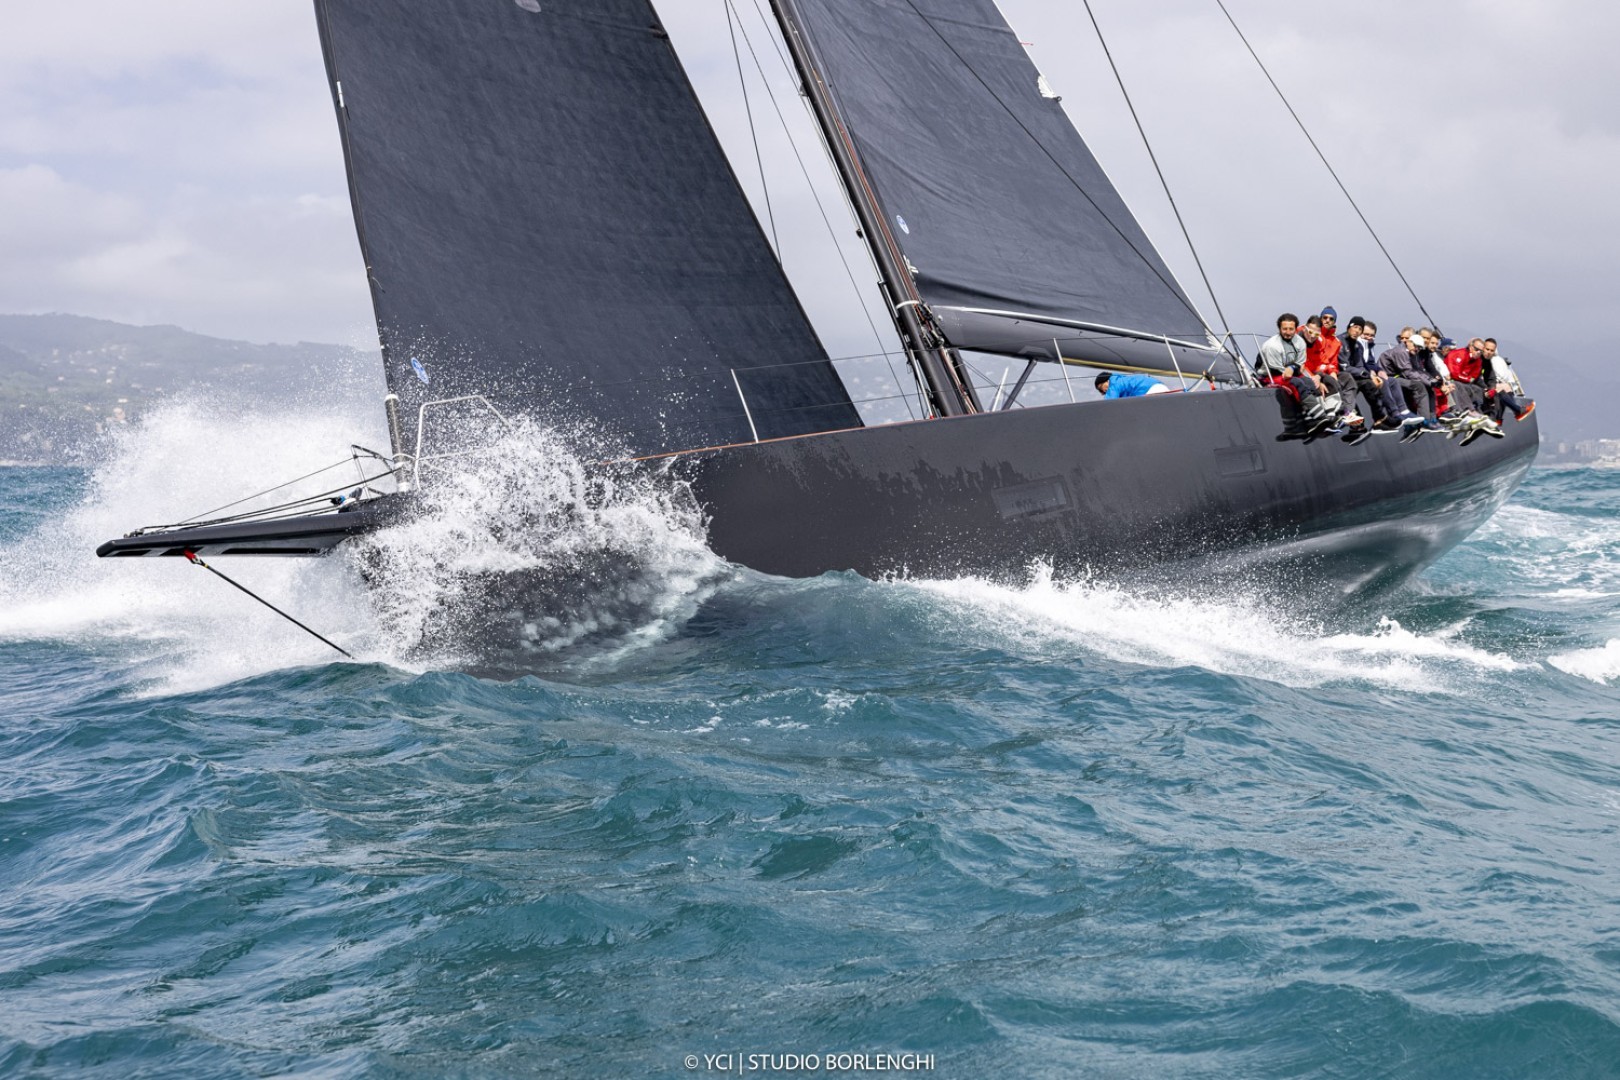 Luciano Gandini's Mylius 80 Twin Soul B is a favourite to claim this weekend's opening regatta of the season in Portofino